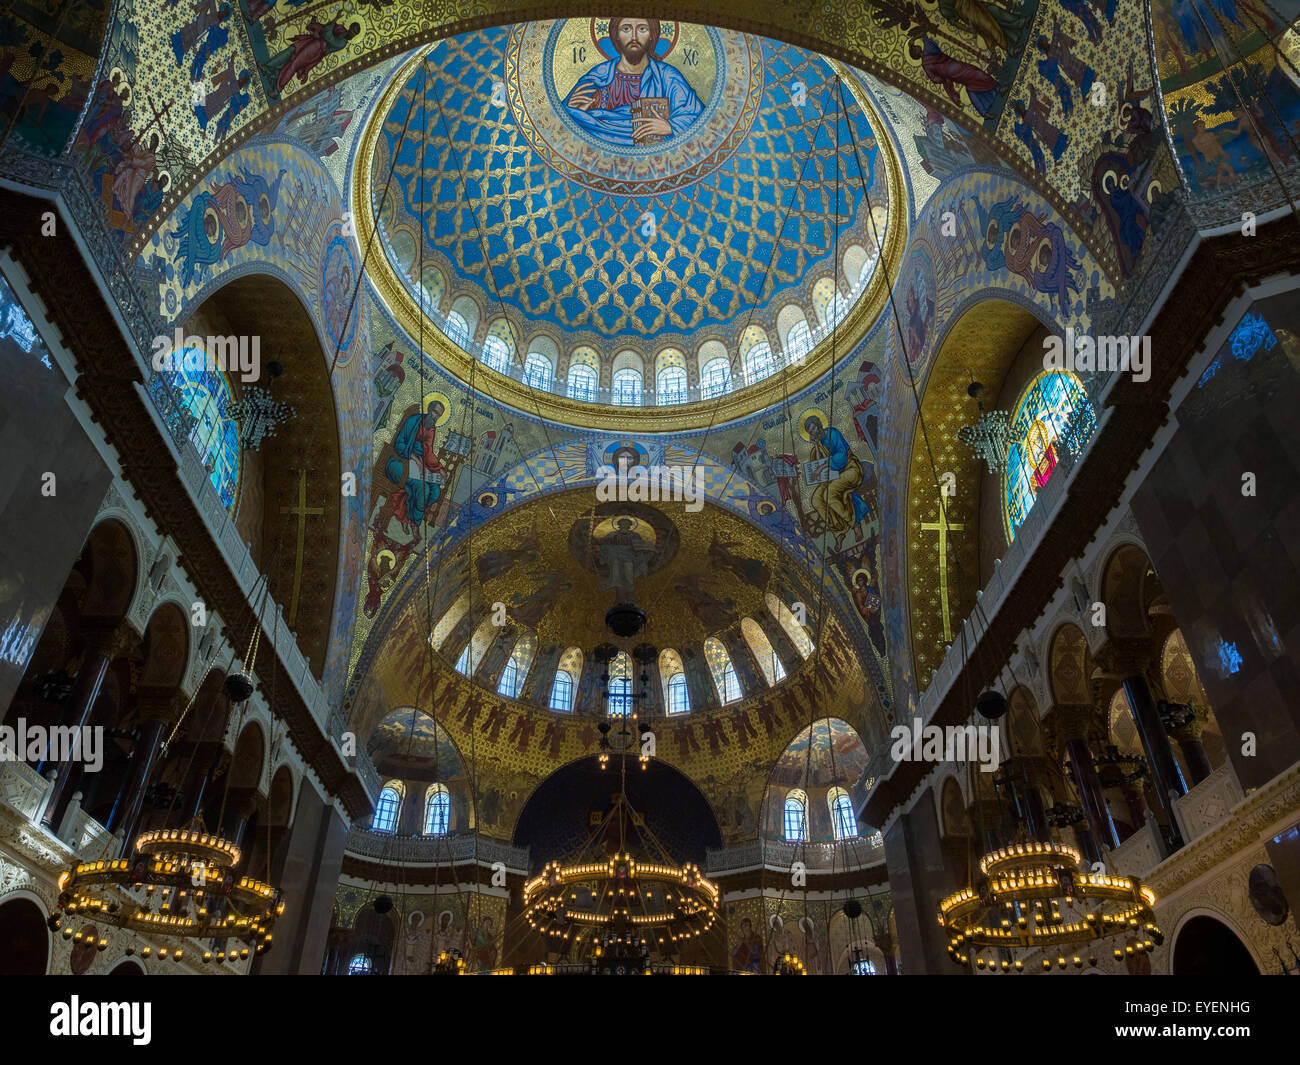 KRONSTADT, RUSSIA - July 21, 2015: Interior Neo-Byzantine decoration of the Naval Russian Orthodox Cathedral of Saint Nicholas. Stock Photo